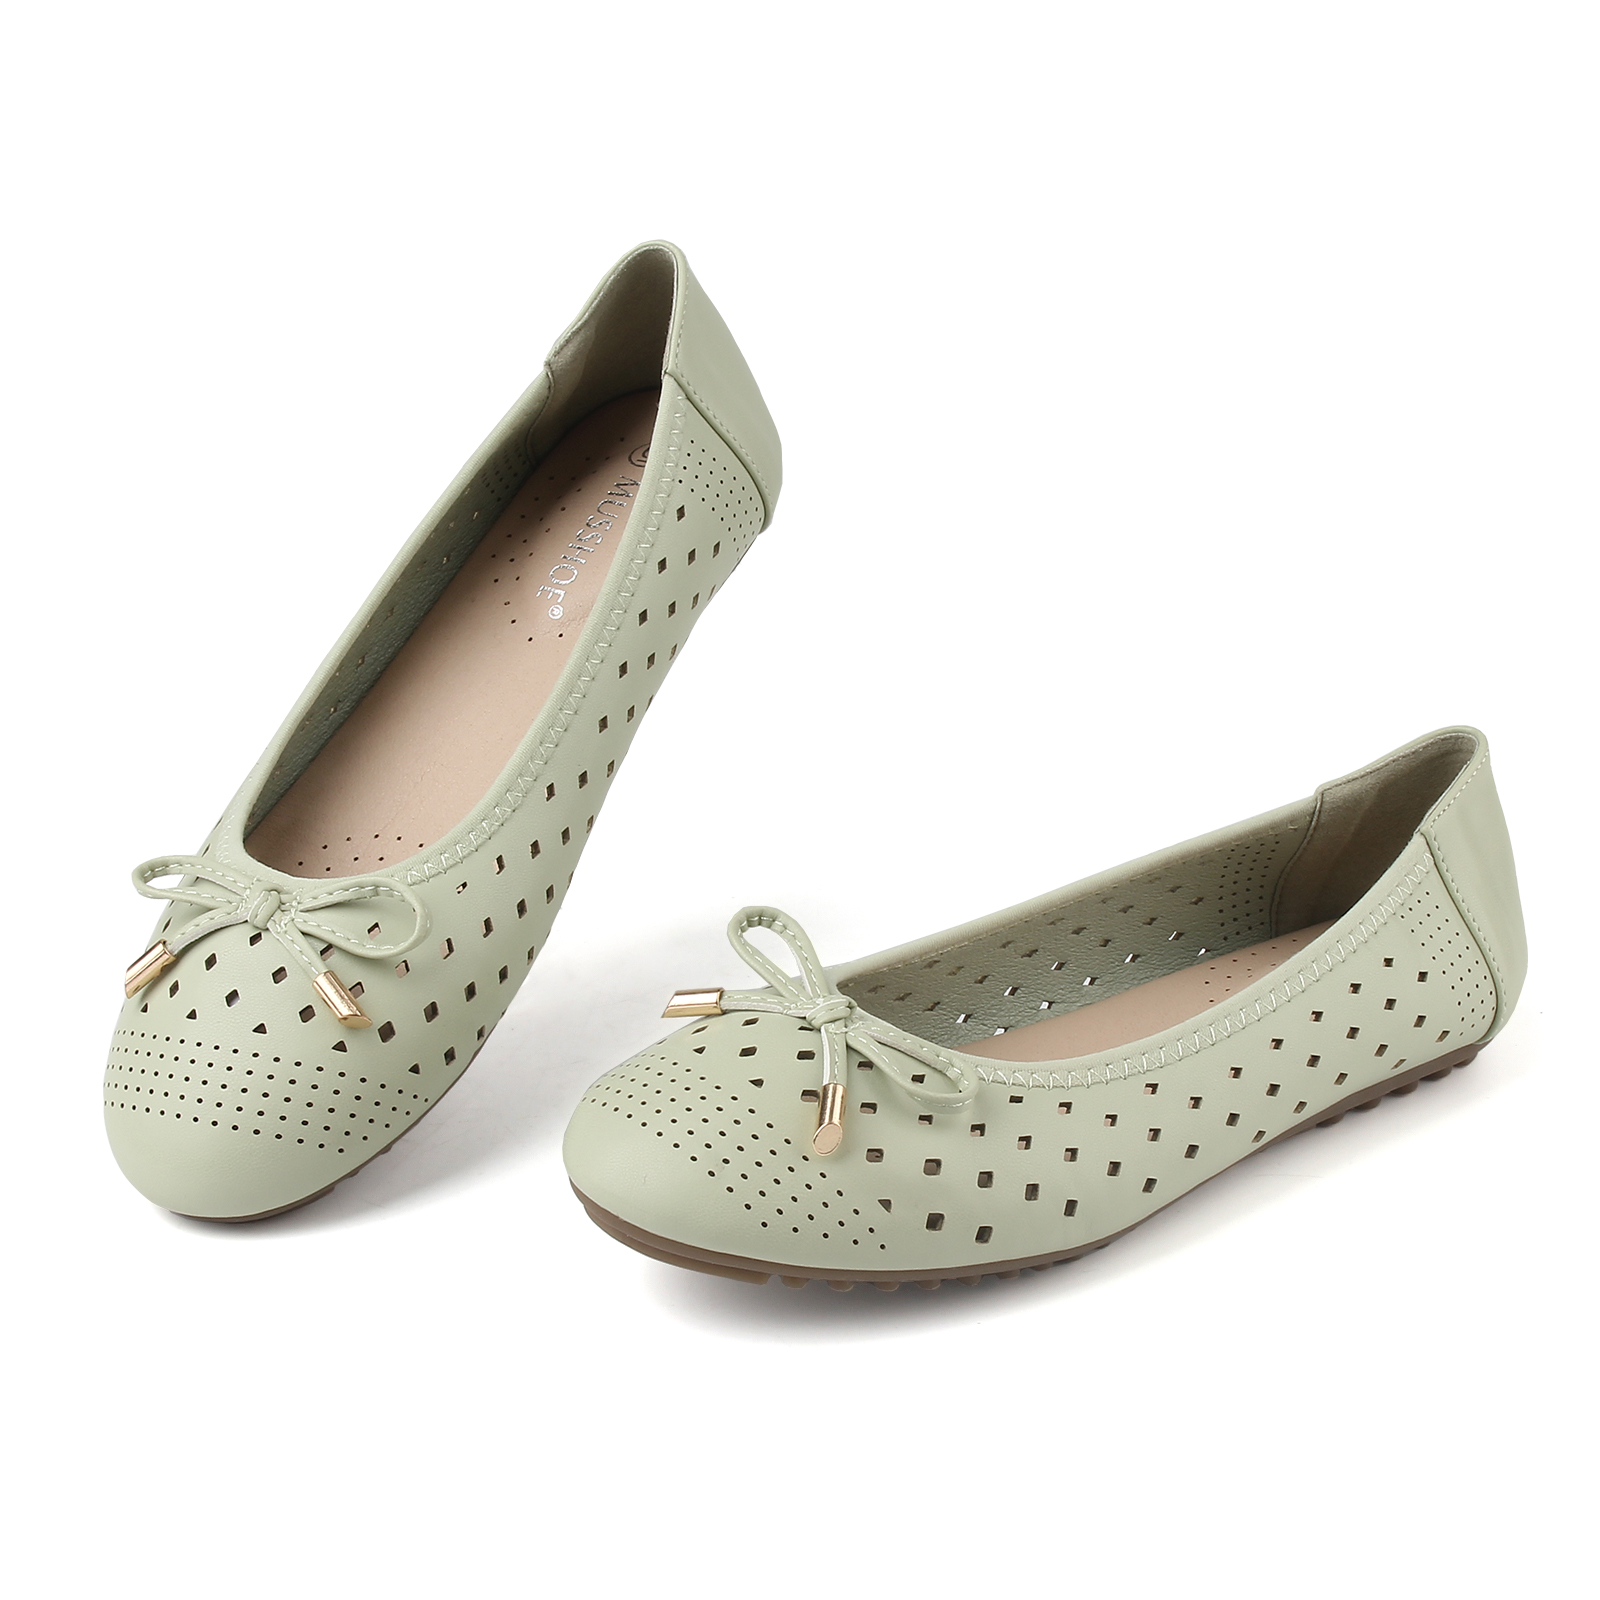 MUSSHOE Hallowed-out Comfortable Flats